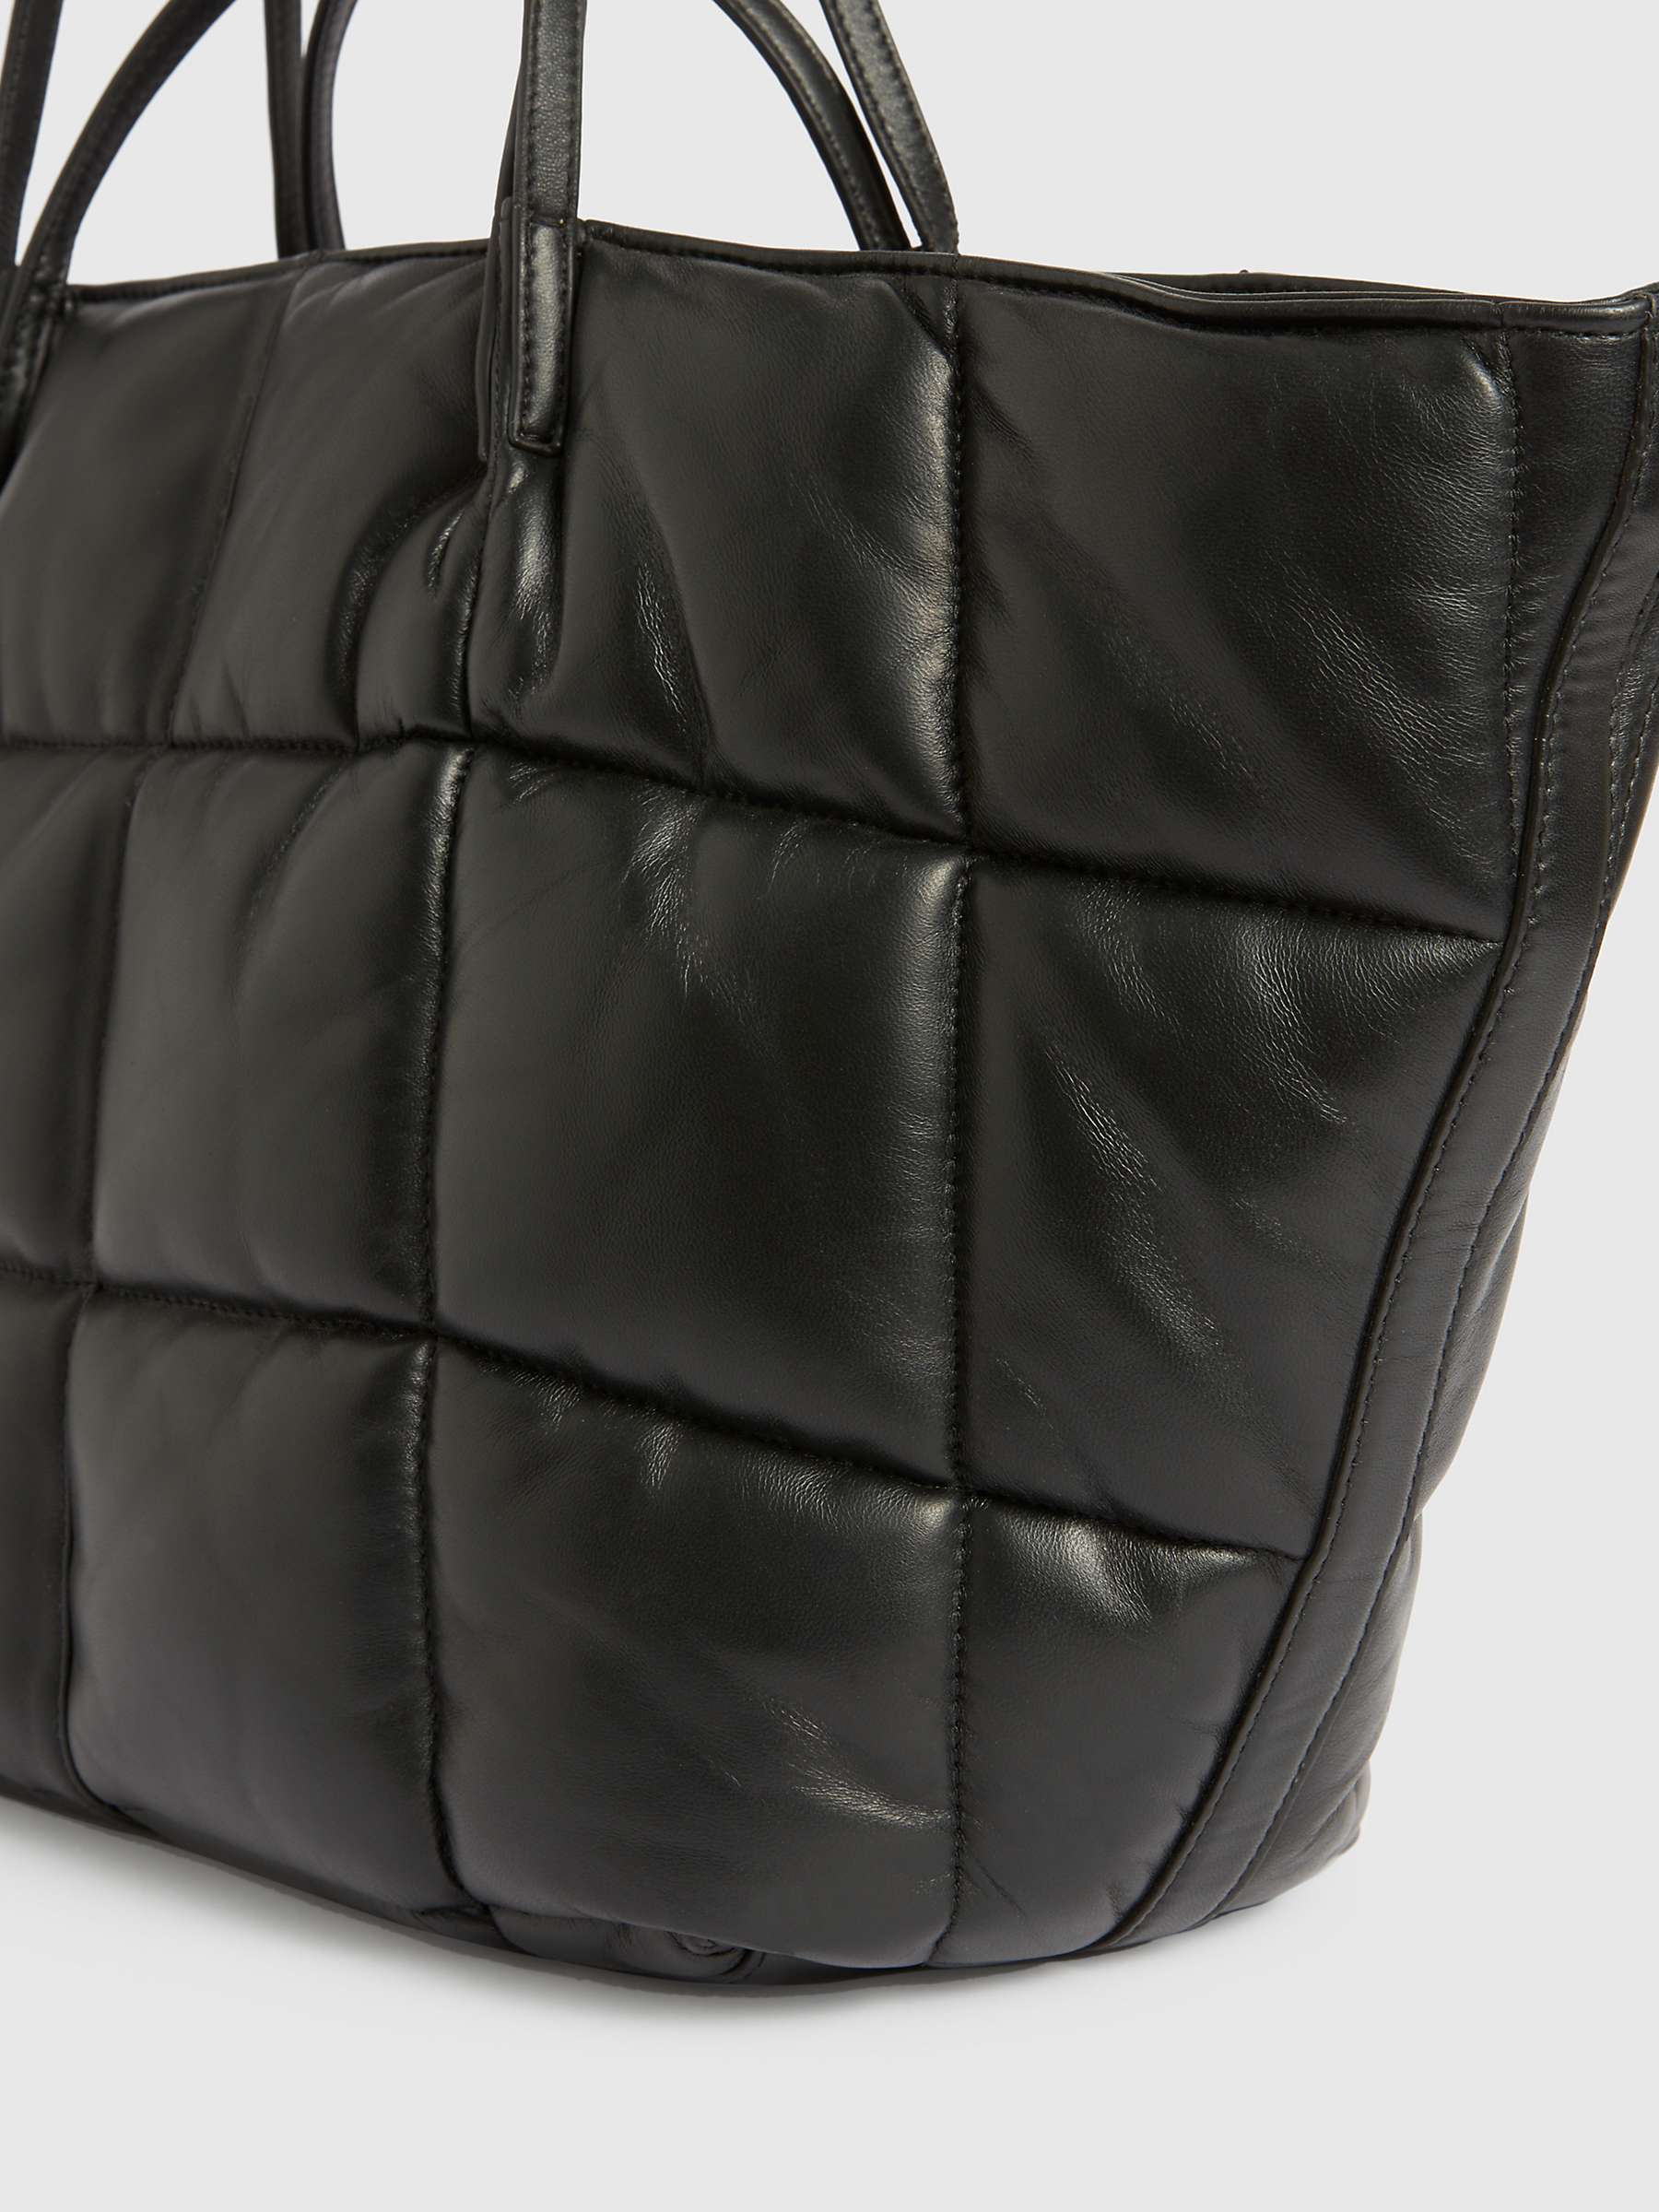 Buy AllSaints Nadaline East to West Quilted Leather Tote Bag Online at johnlewis.com